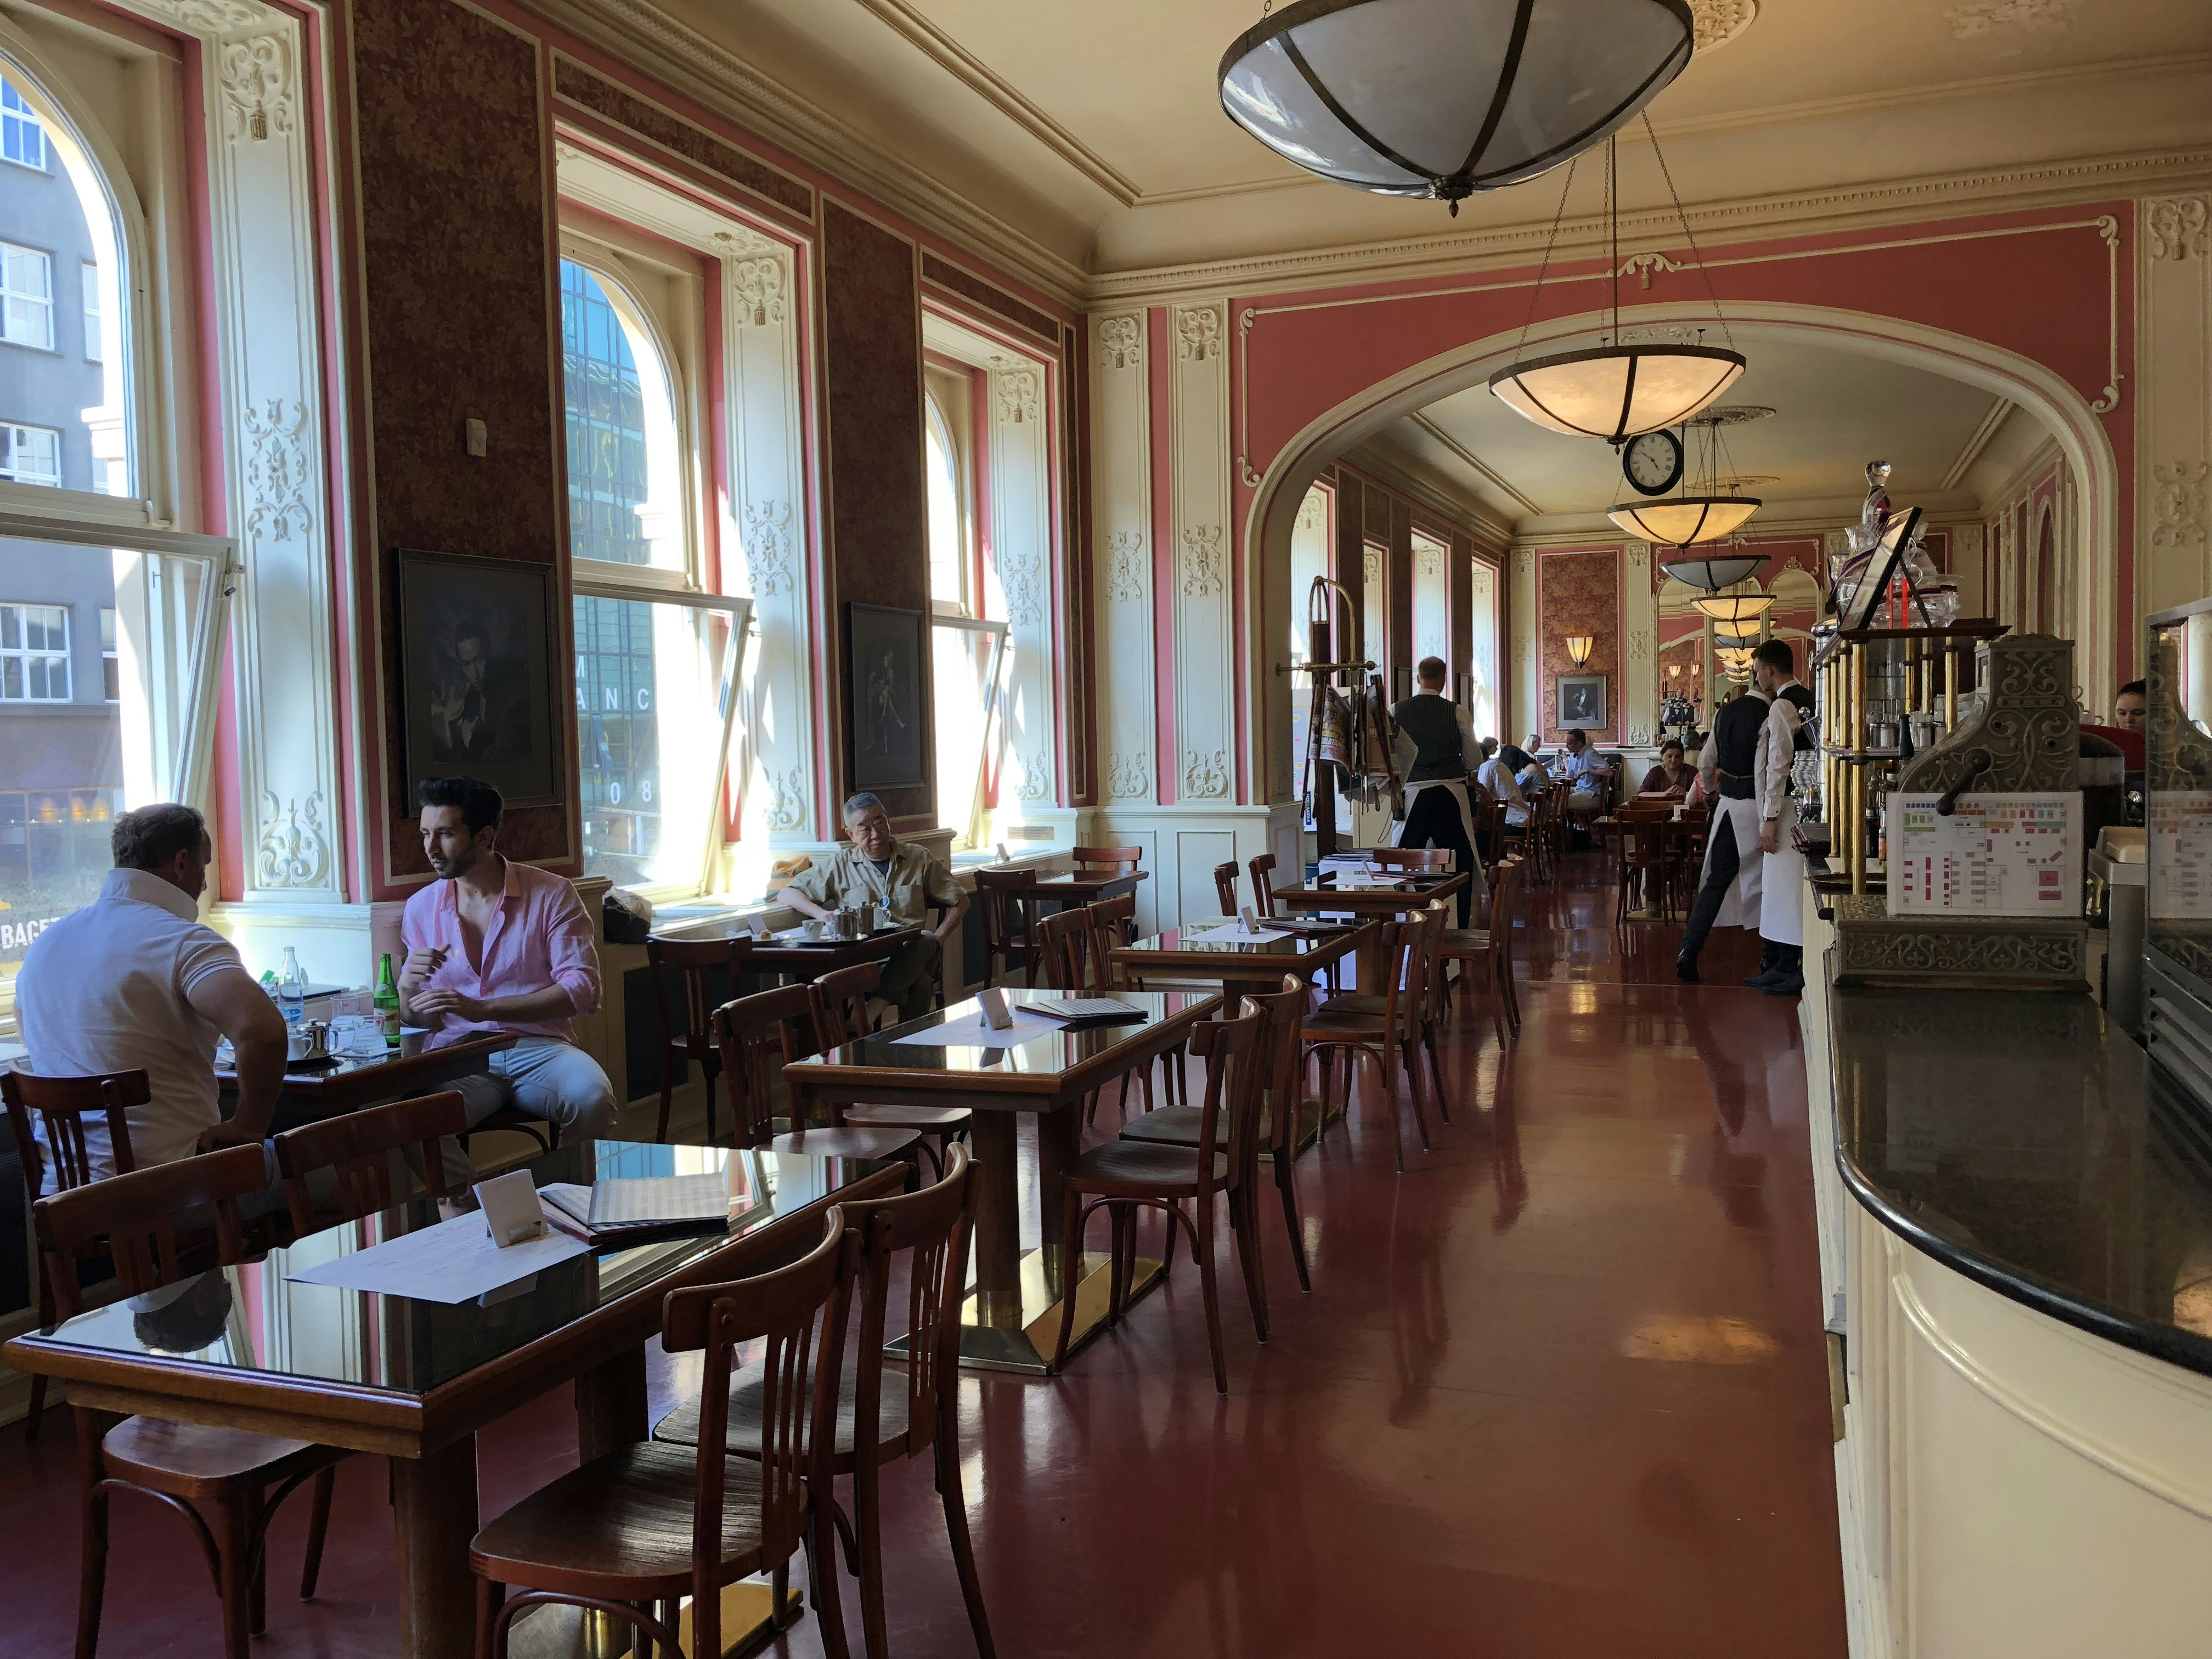 Patrons inside Café Louvre, with its high ceilings and Parisian-style flourishes